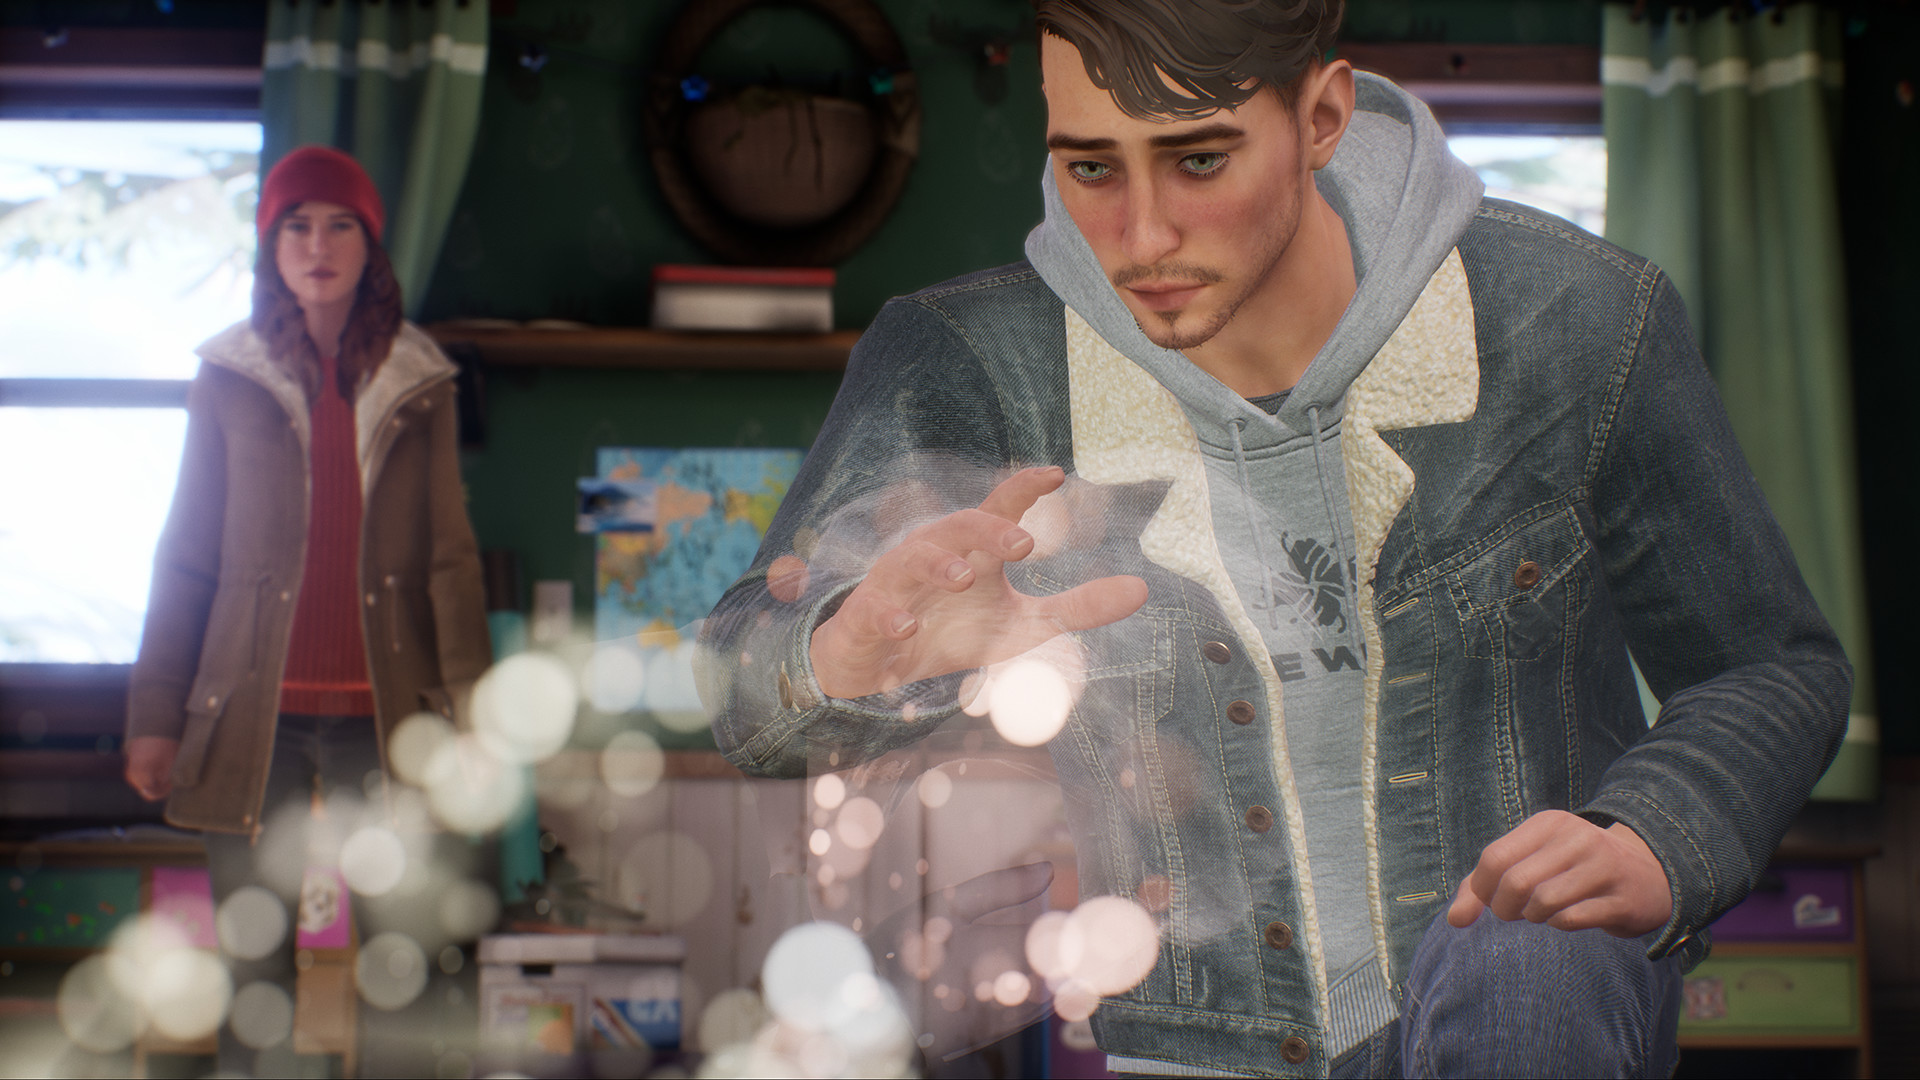 Tell Me Why, by Dontnod Entertainment